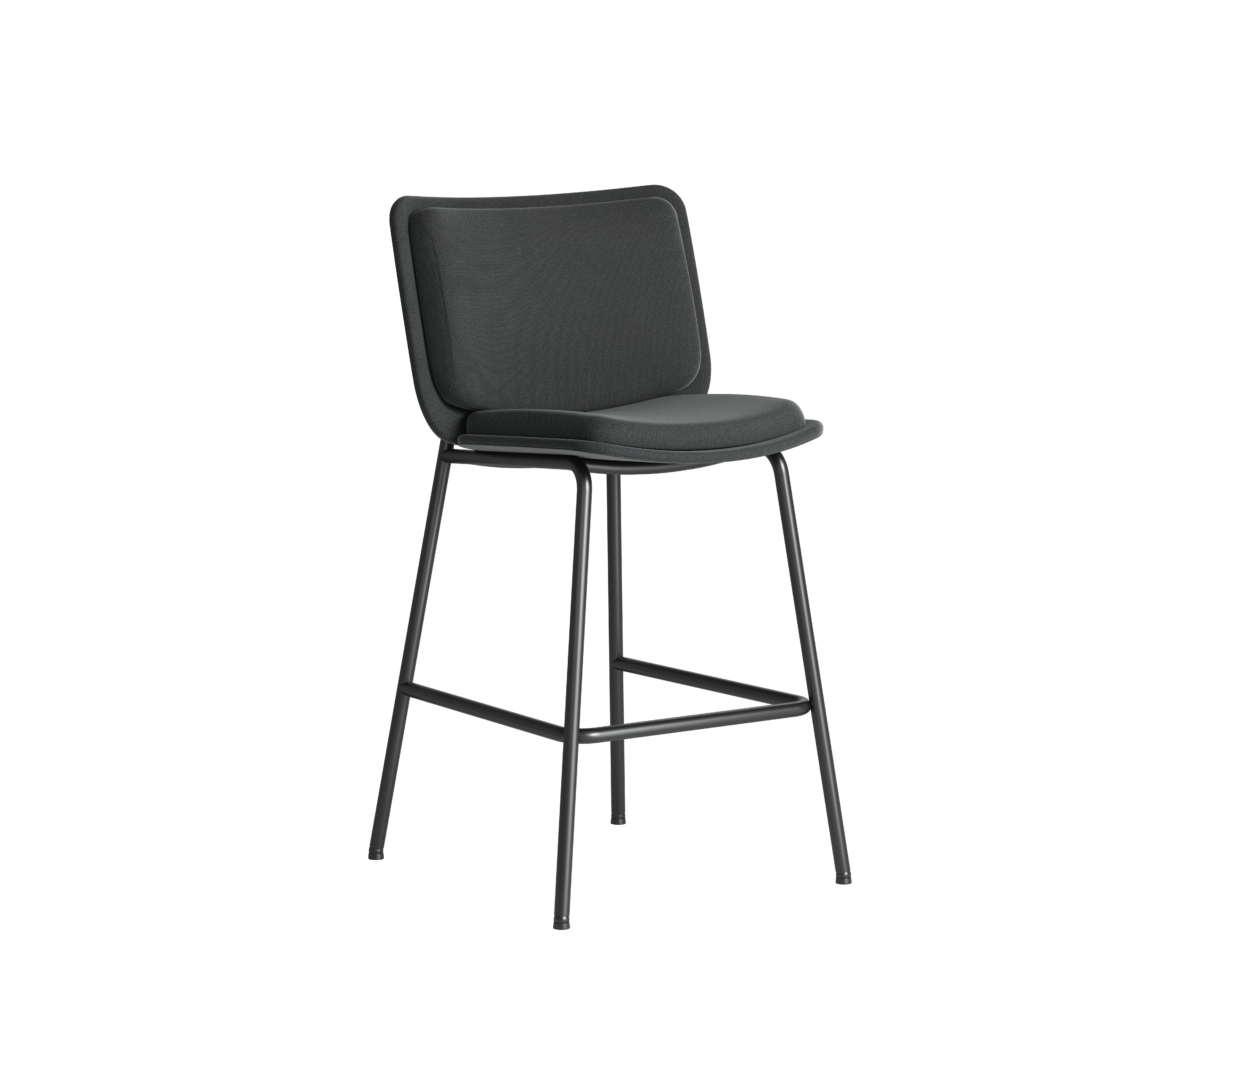 OCEE_FOUR – Stools _ Benches – FourAll Stool Fully Upholstered – Packshot Image 1